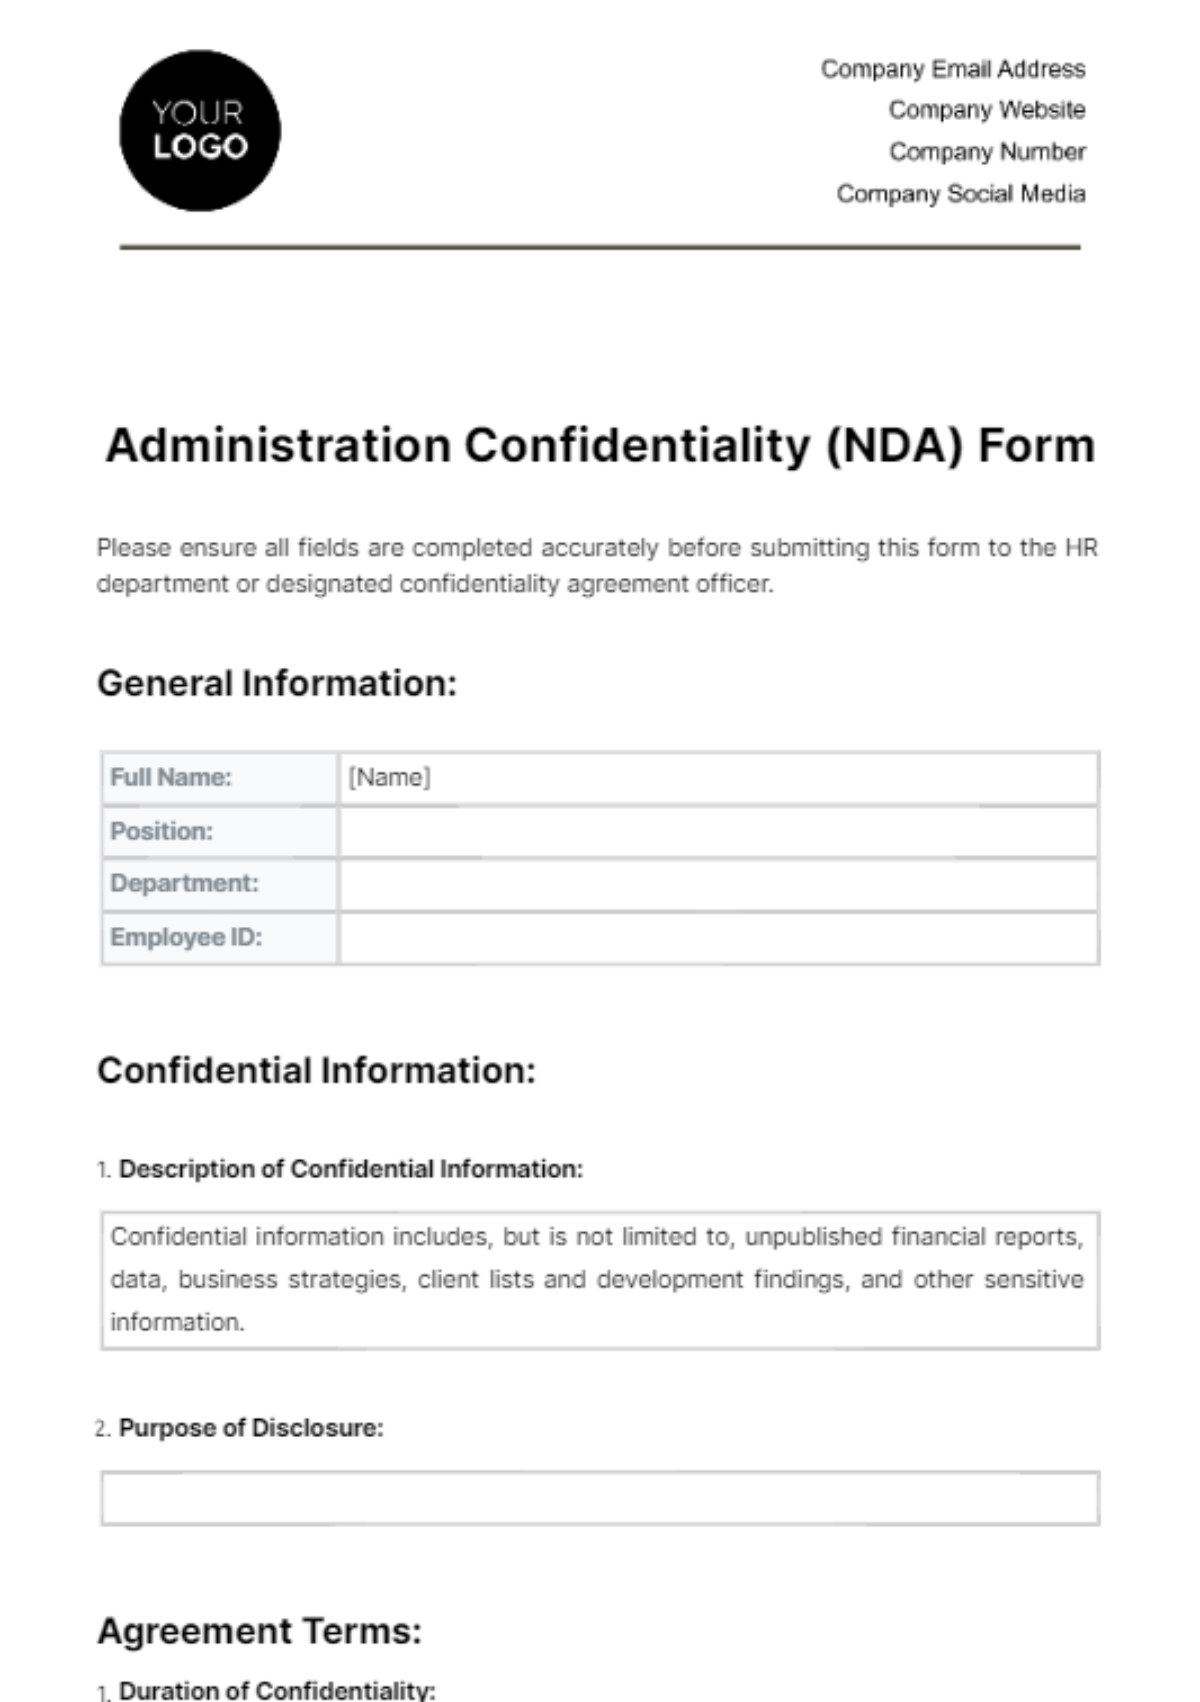 Administration Confidentiality (NDA) Form Template